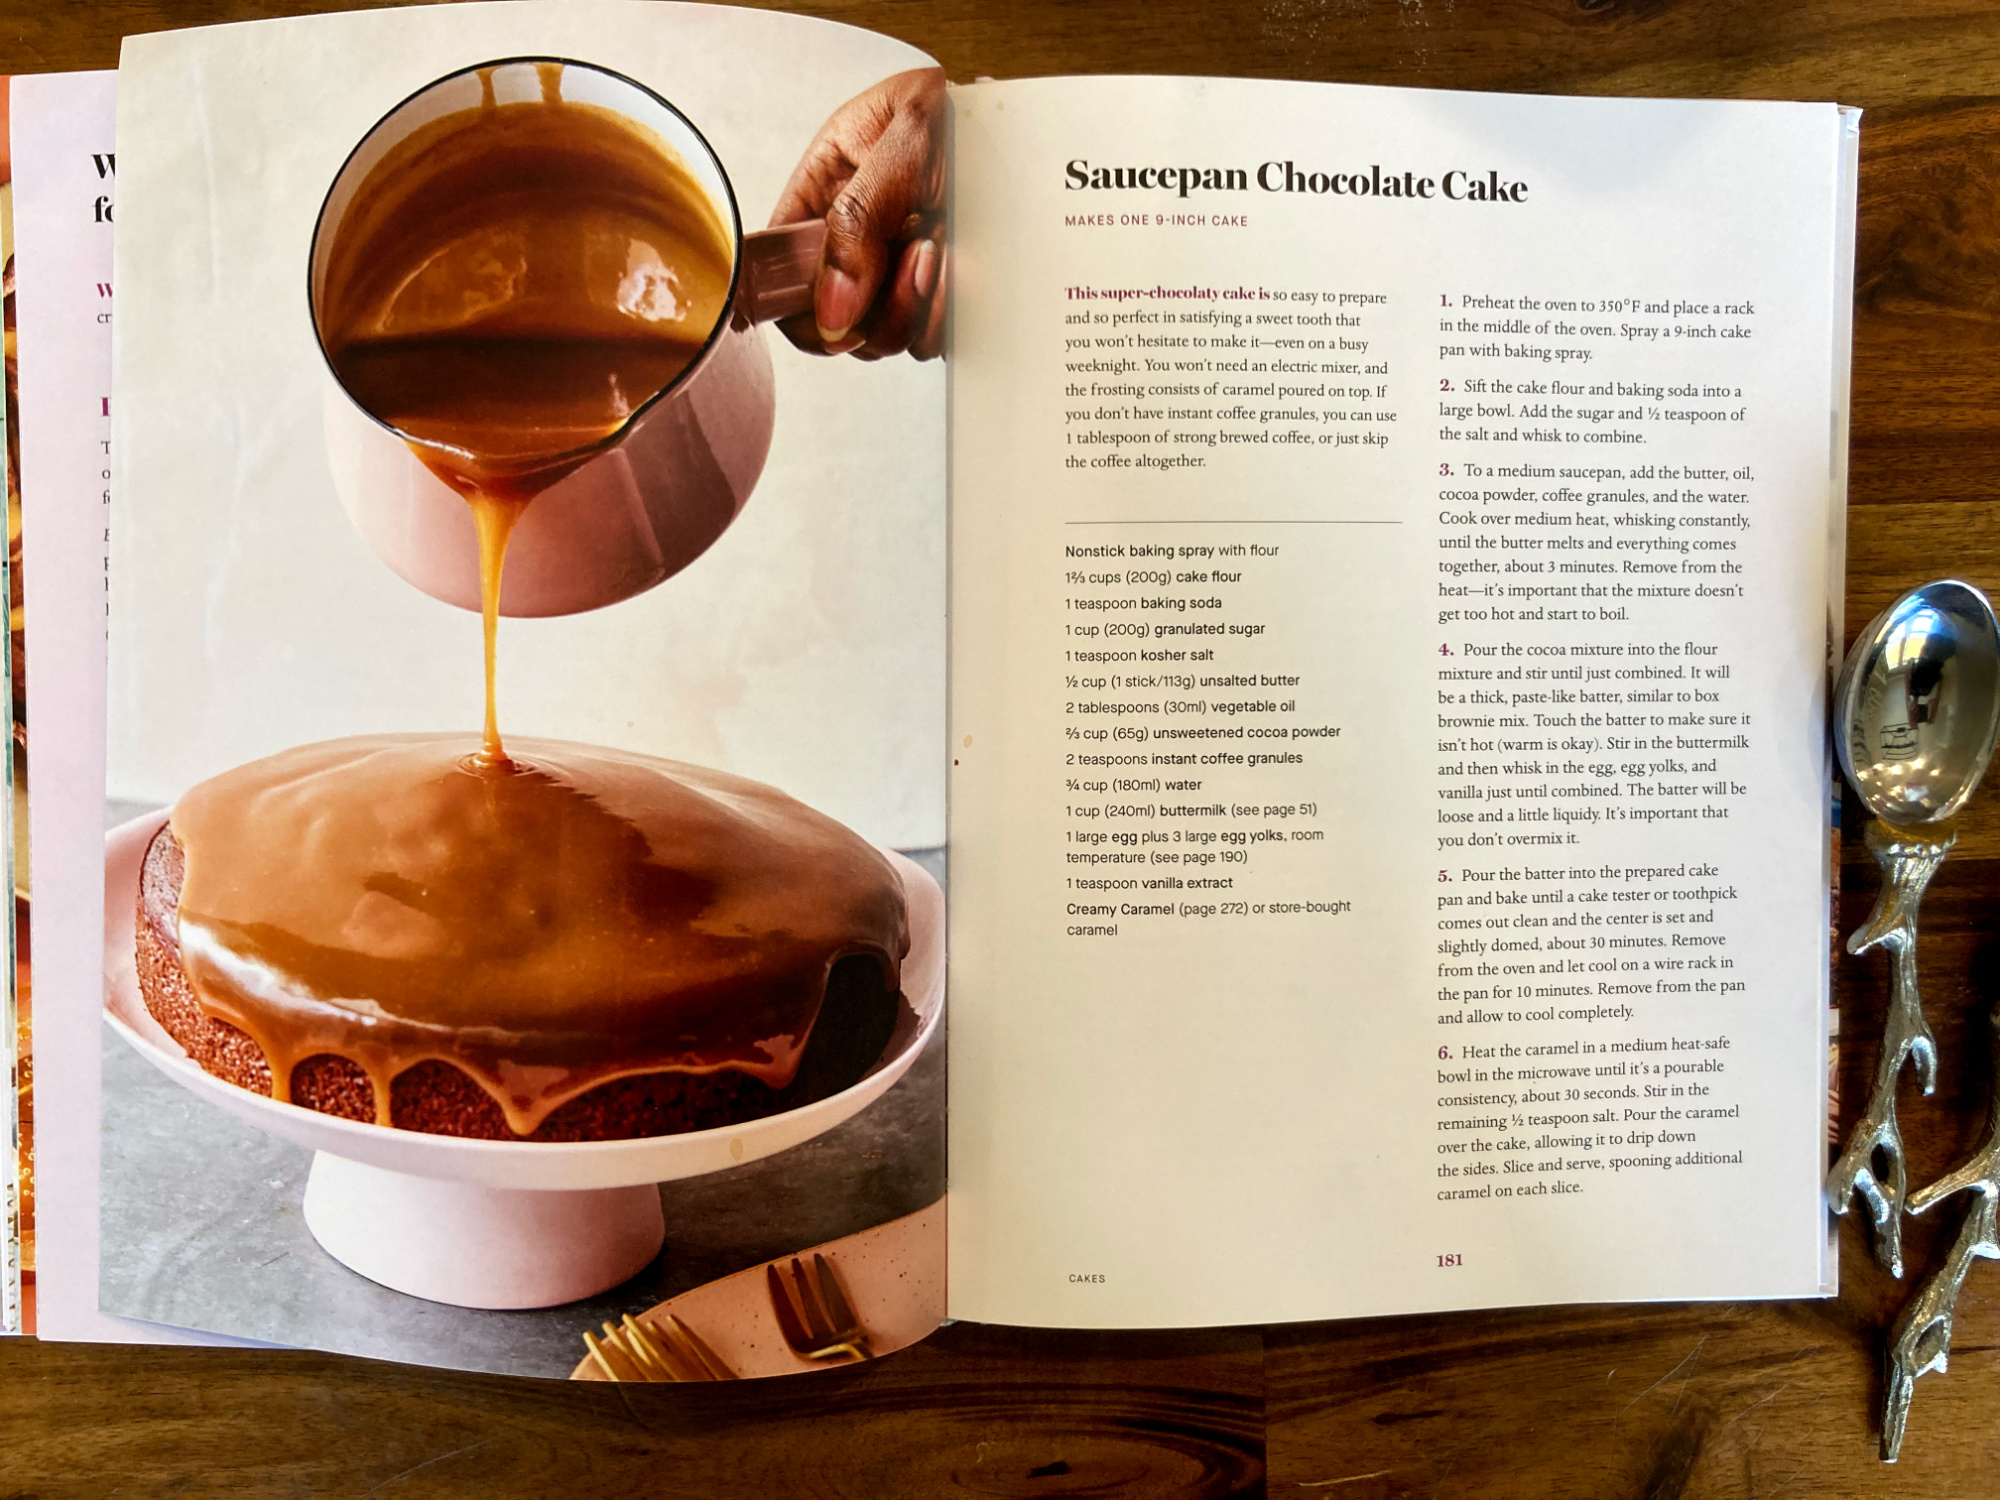 We are crazy about Vallery Lomas's recipe for Saucepan Chocolate Cake in her new cookbook, Life Is What You Bake It